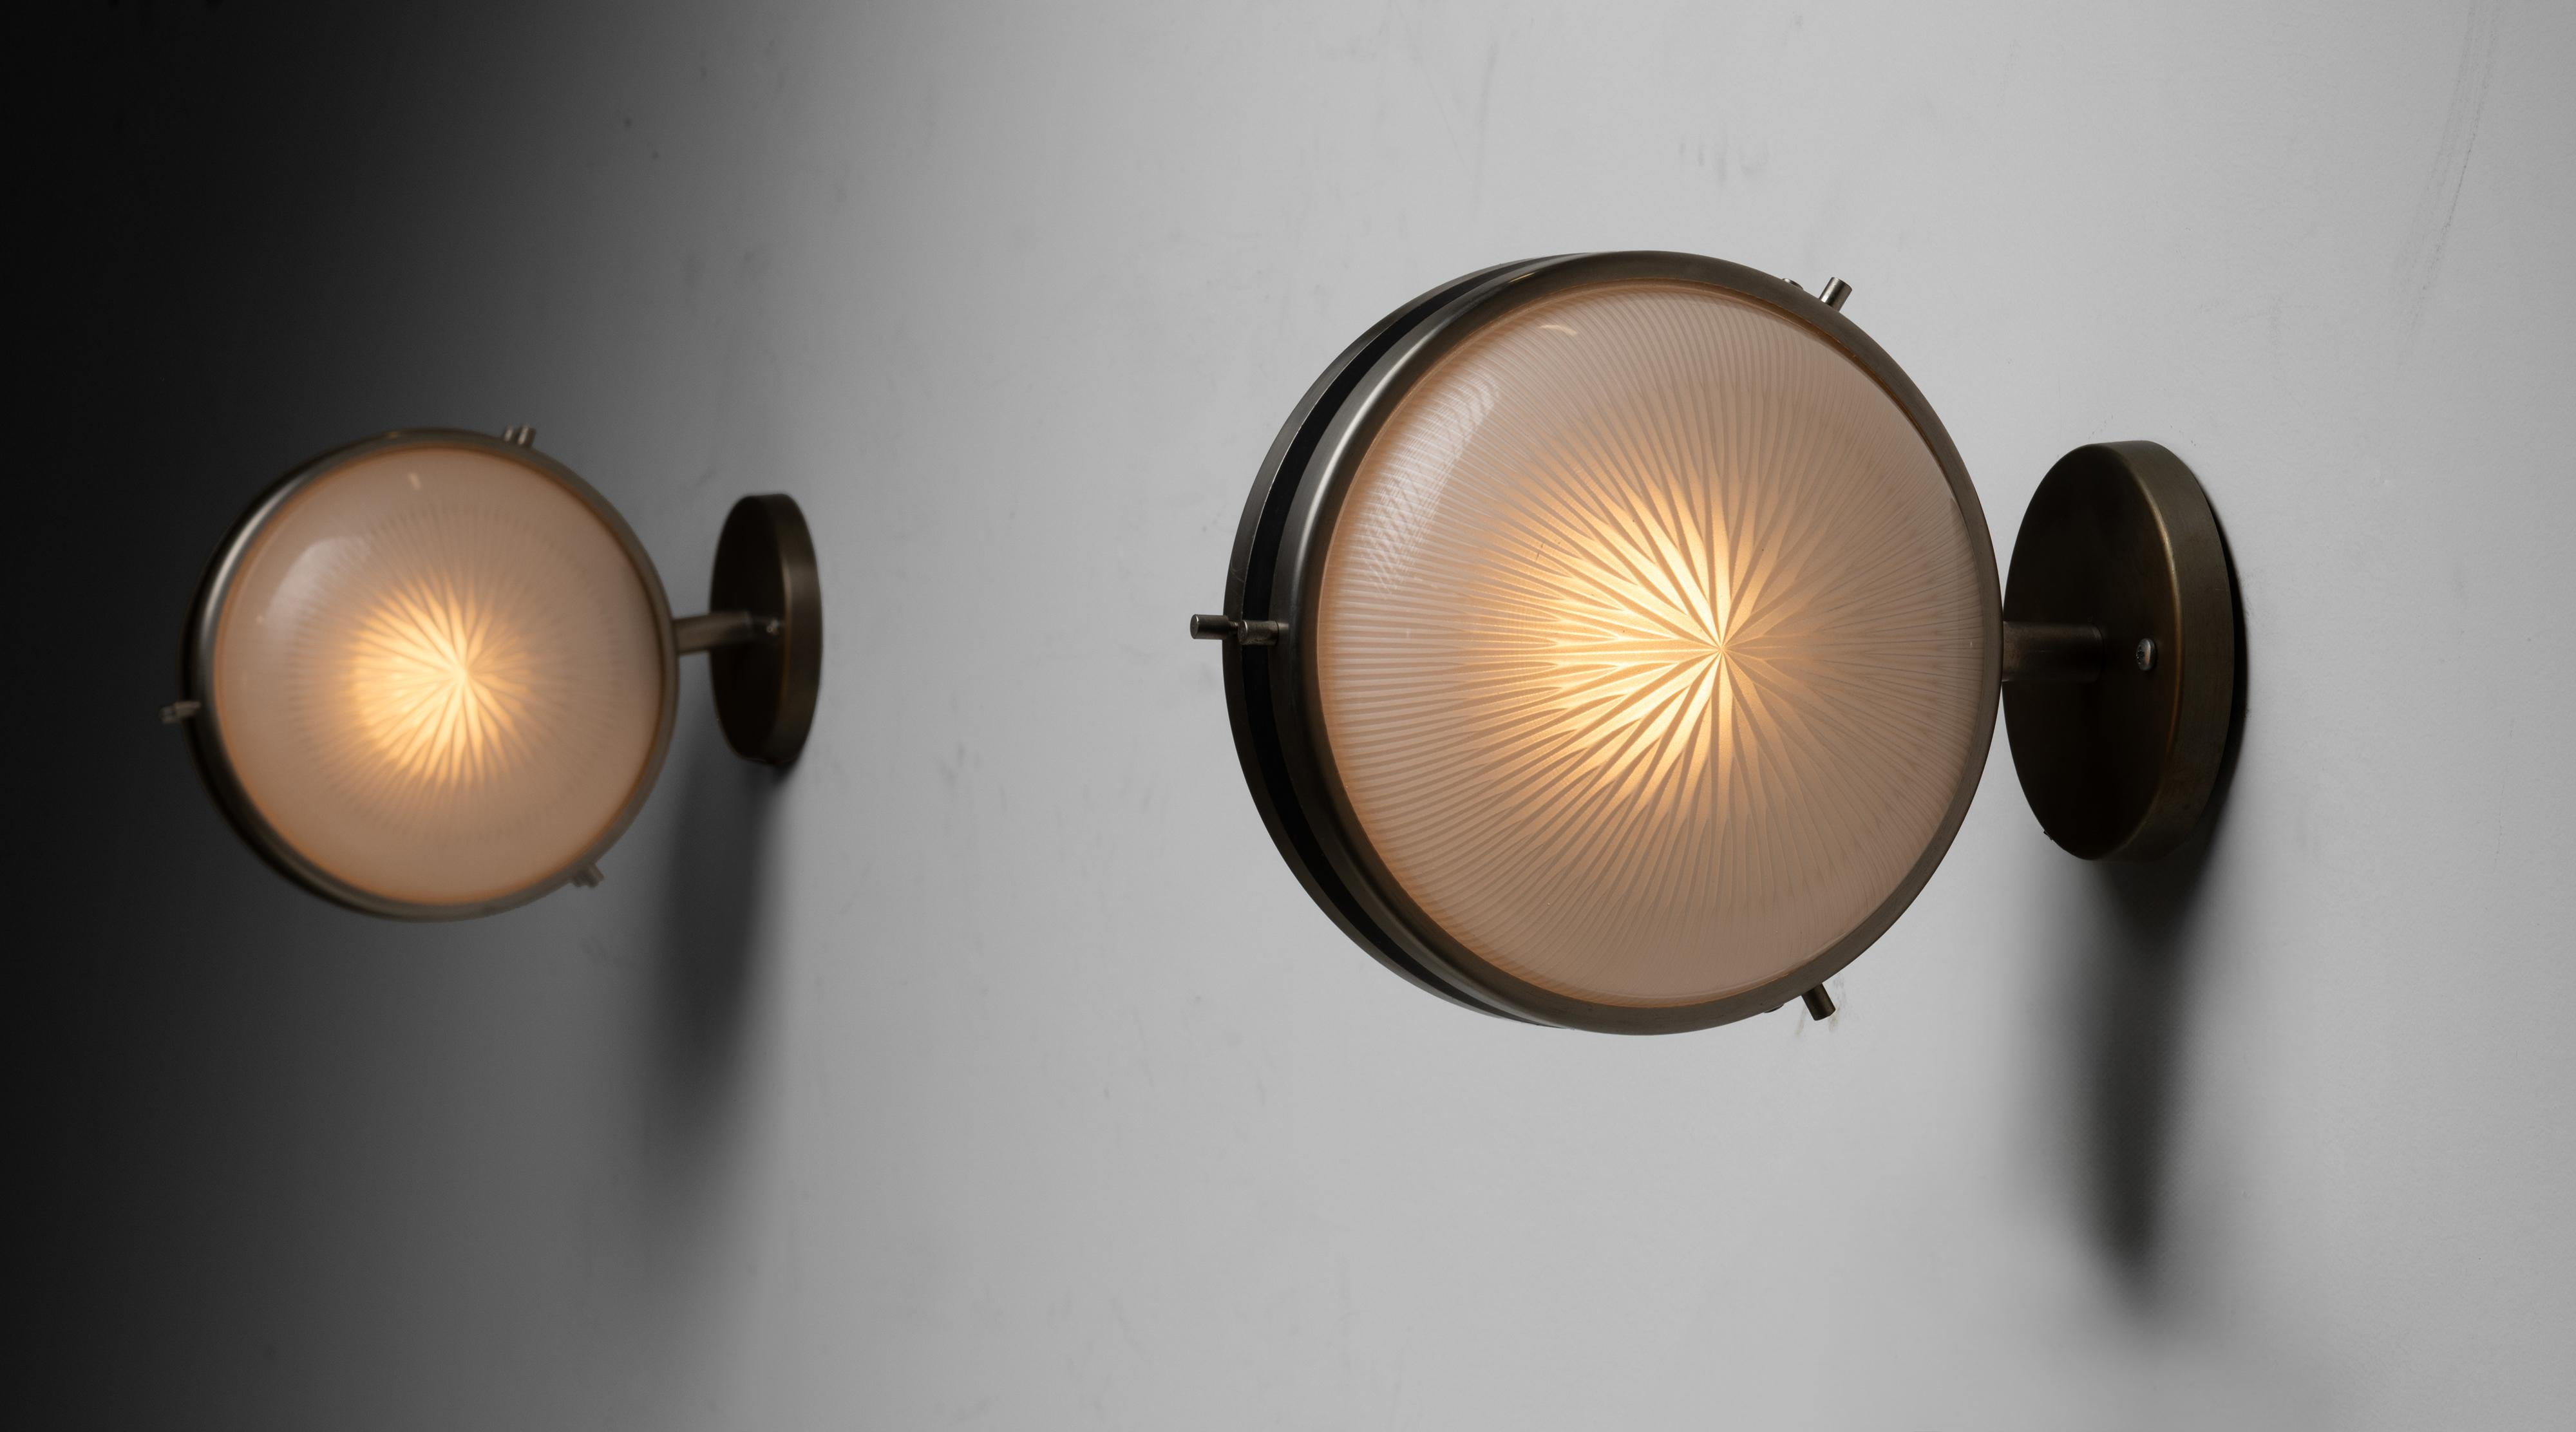 Artemide Sconces by Sergio Mazza
Italy circa 1960
Nickeled and black enameled brass with two pressed opaline glass diffusers. Designed by Sergio Mazza.
5”w x 9.5”d x 8”h